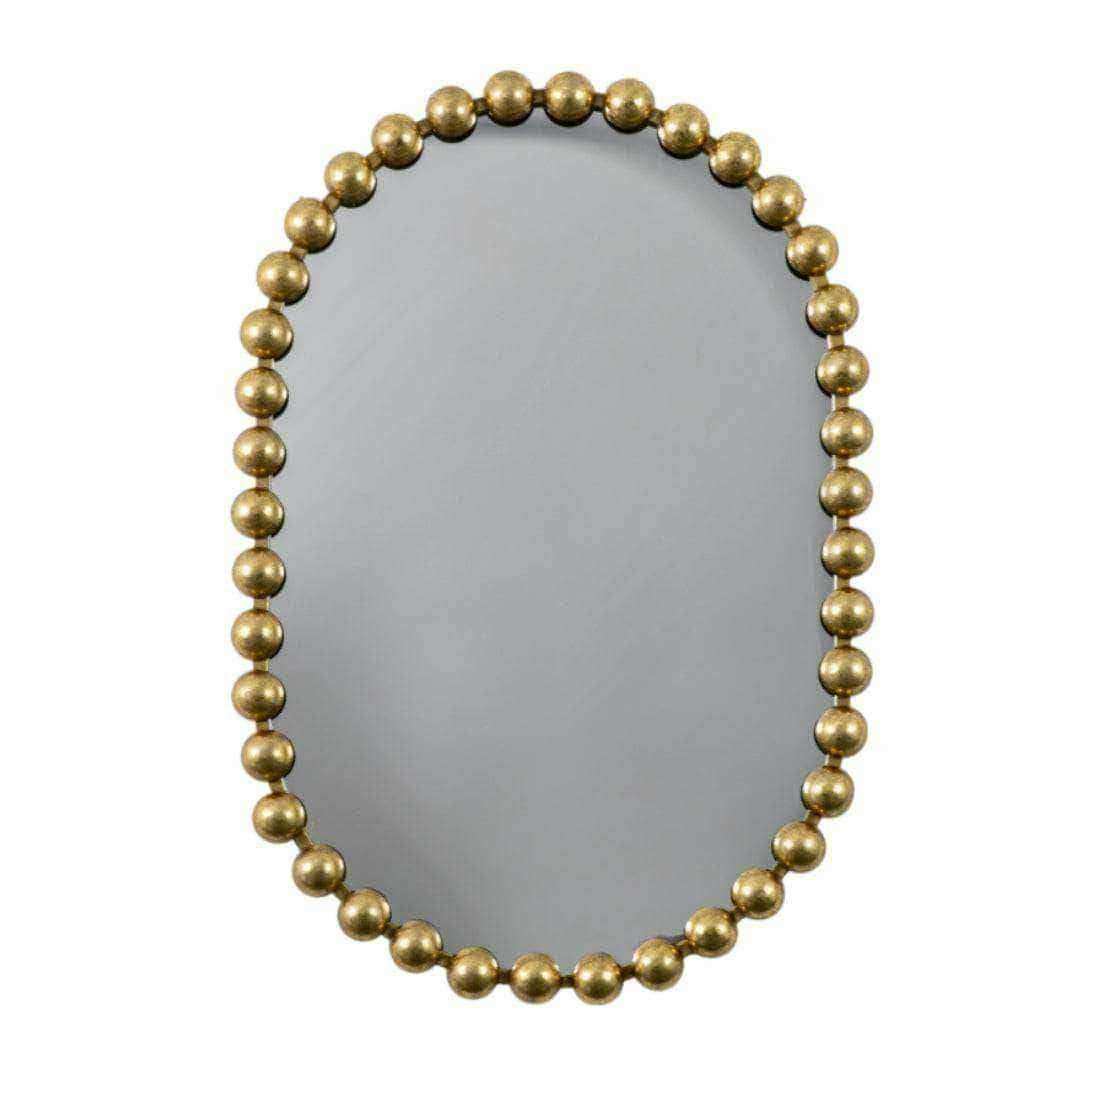 Distressed Gold Large Beaded Portrait Mirror - The Farthing